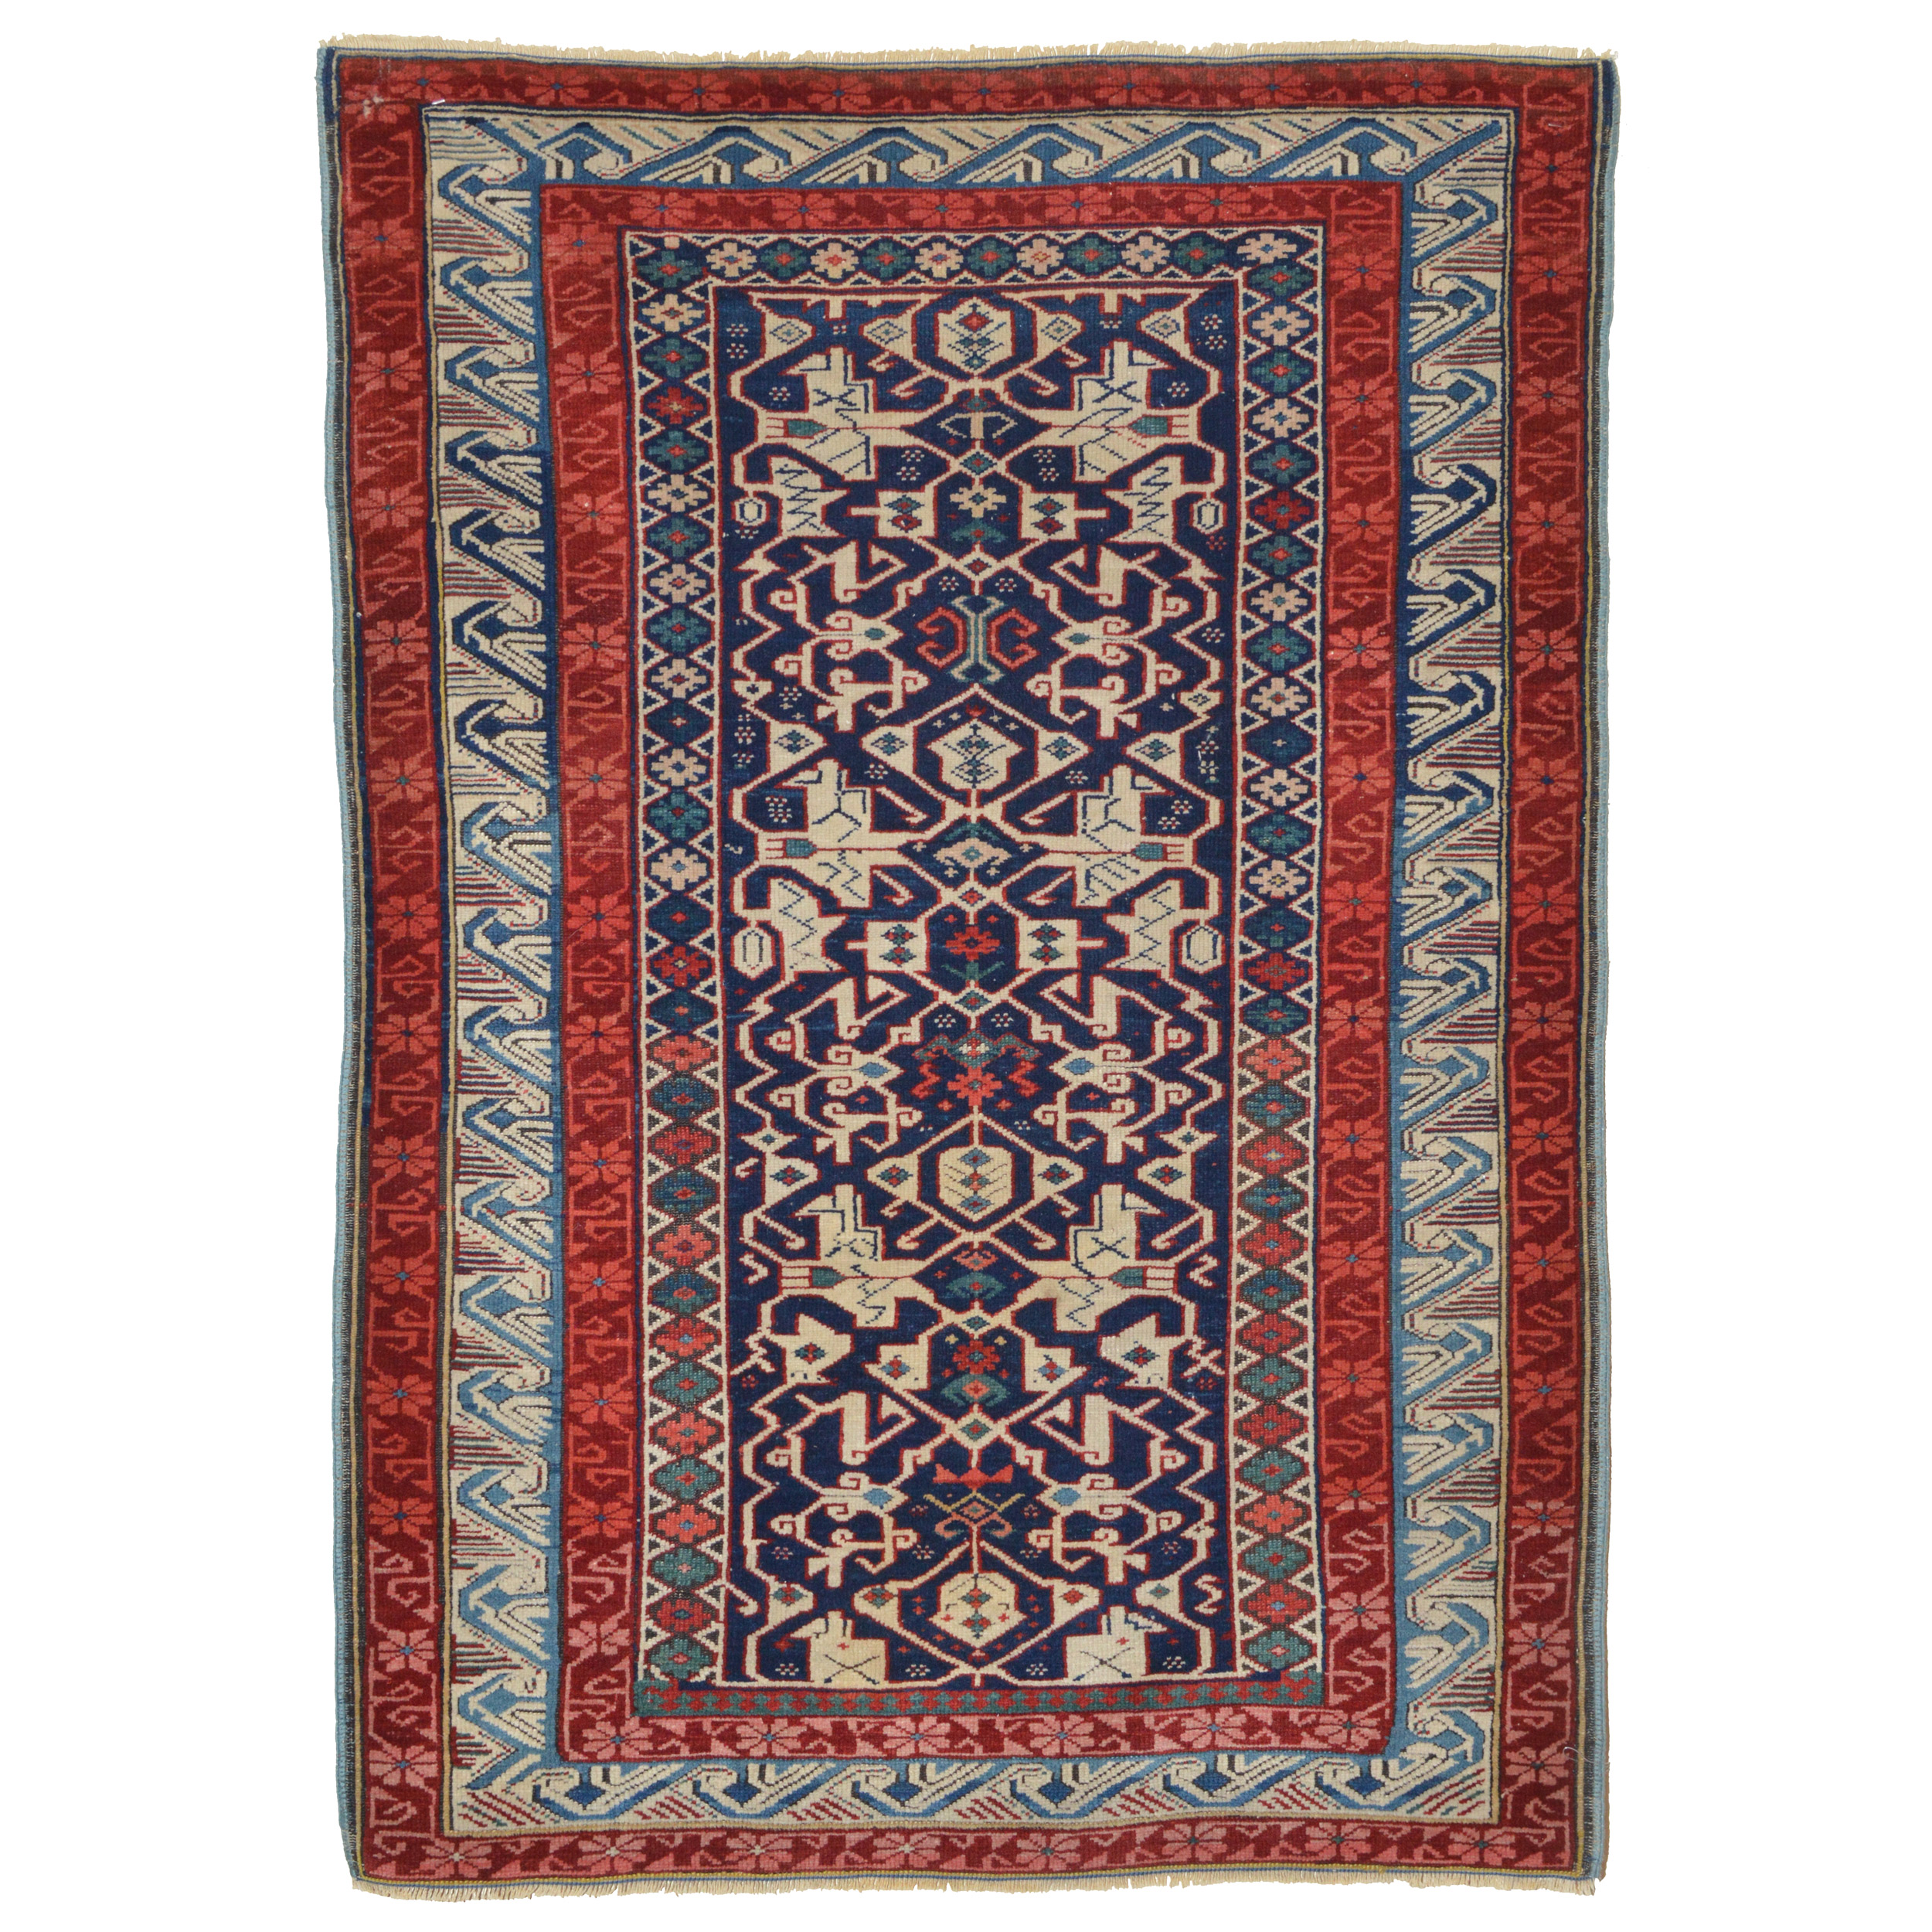 Antique Caucasian Seychour Kuba rug with a navy blue field that is framed by an ivory "running dog" or "wave" border, circa 1890. Douglas Stock Gallery, antique Oriental rugs Boston,MA area